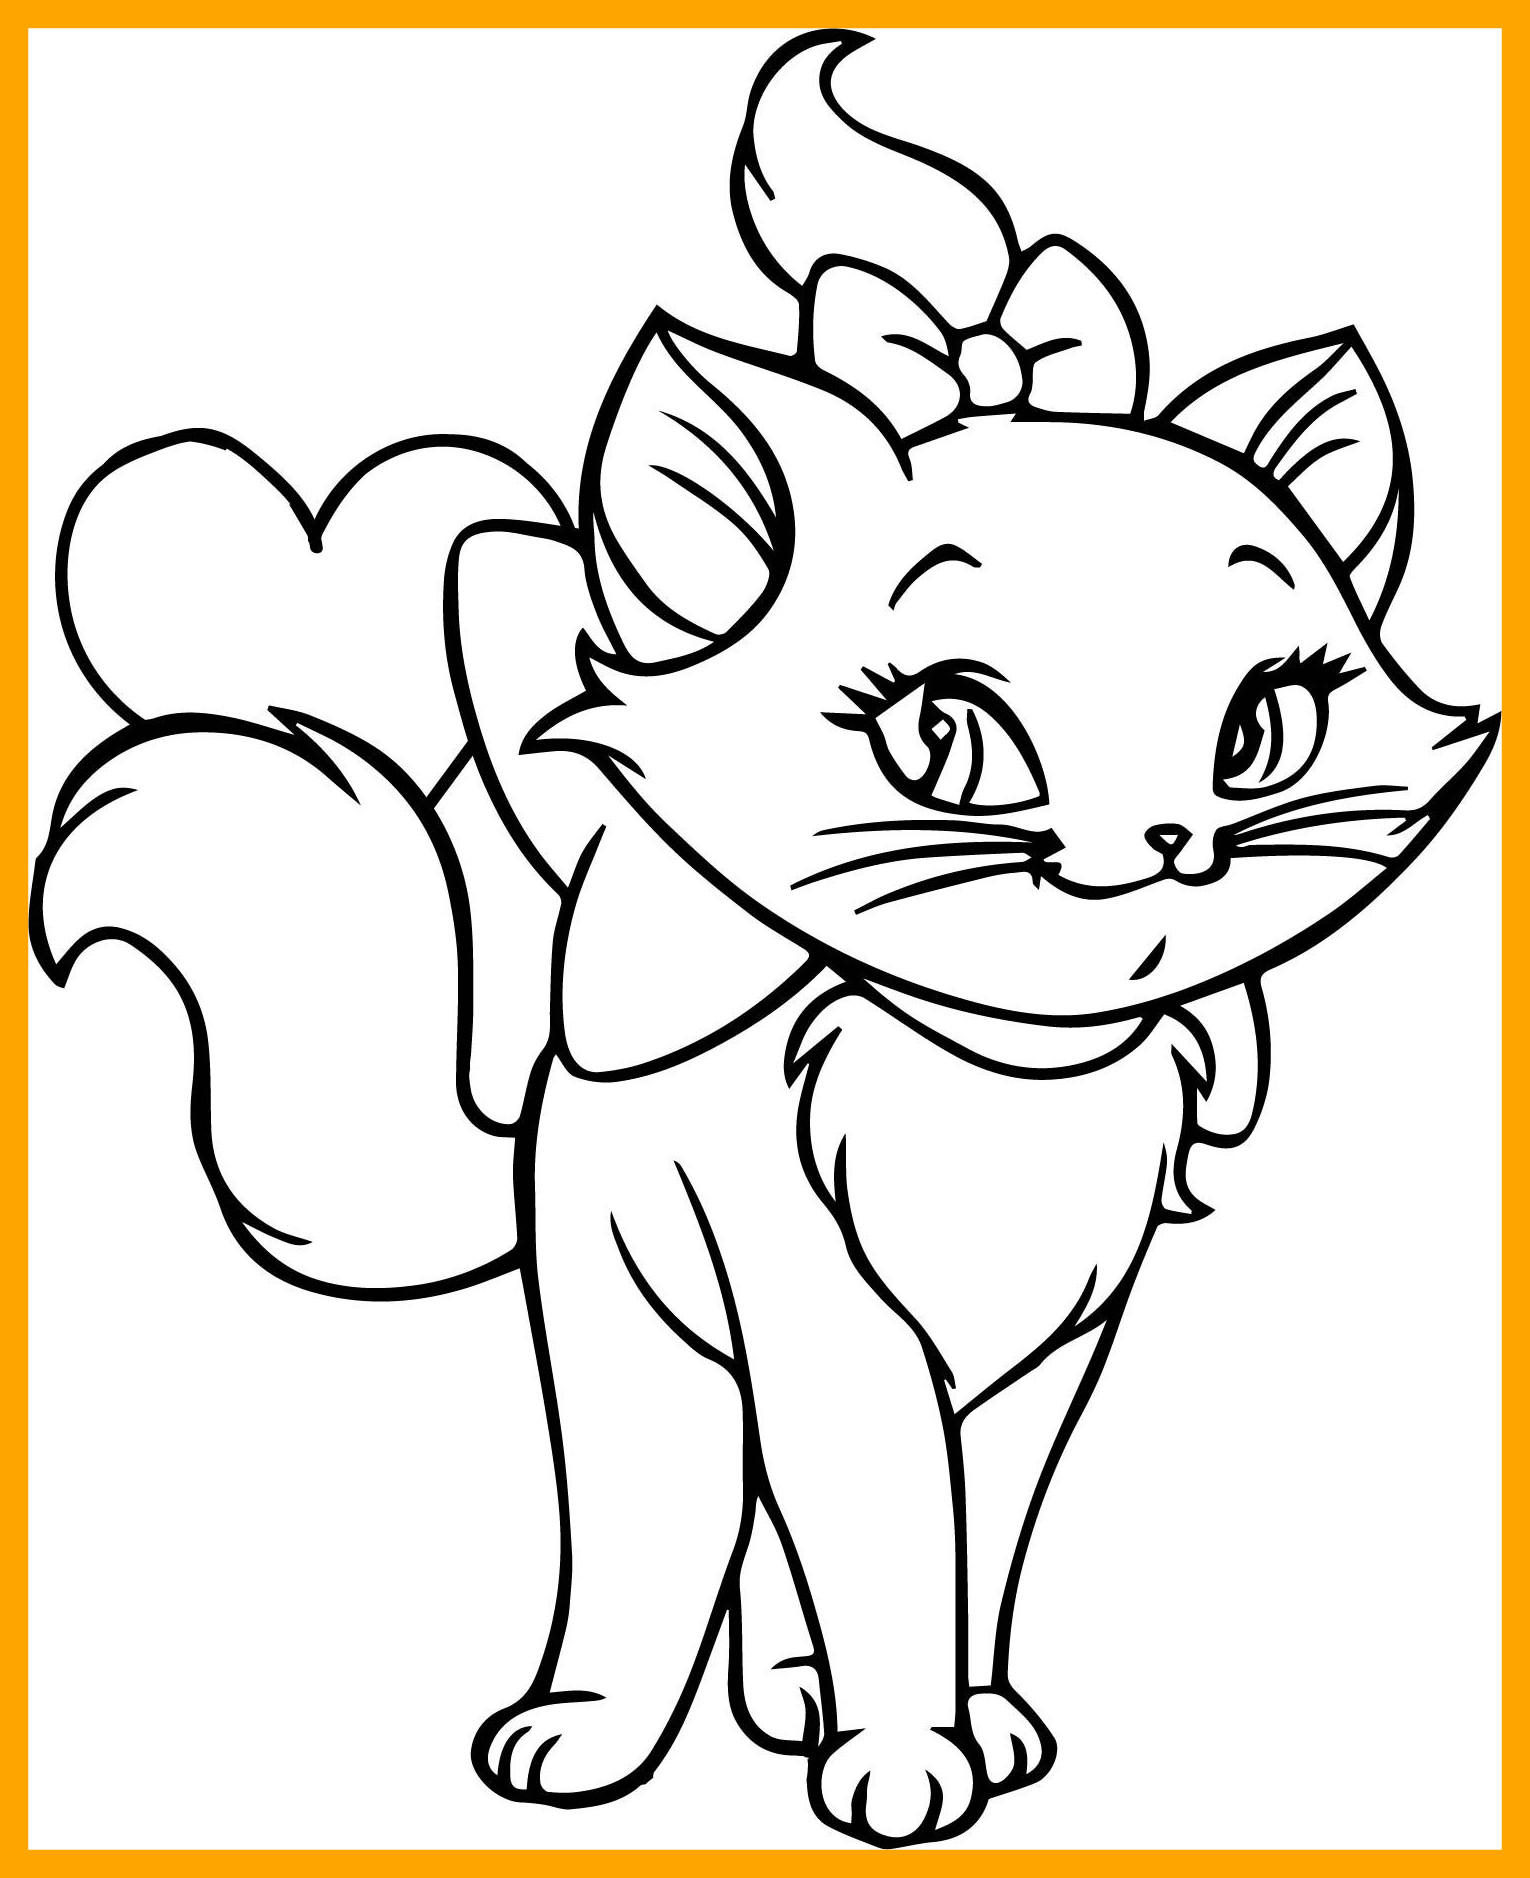 Disney Love Coloring Pages At Getcolorings.com | Free Printable